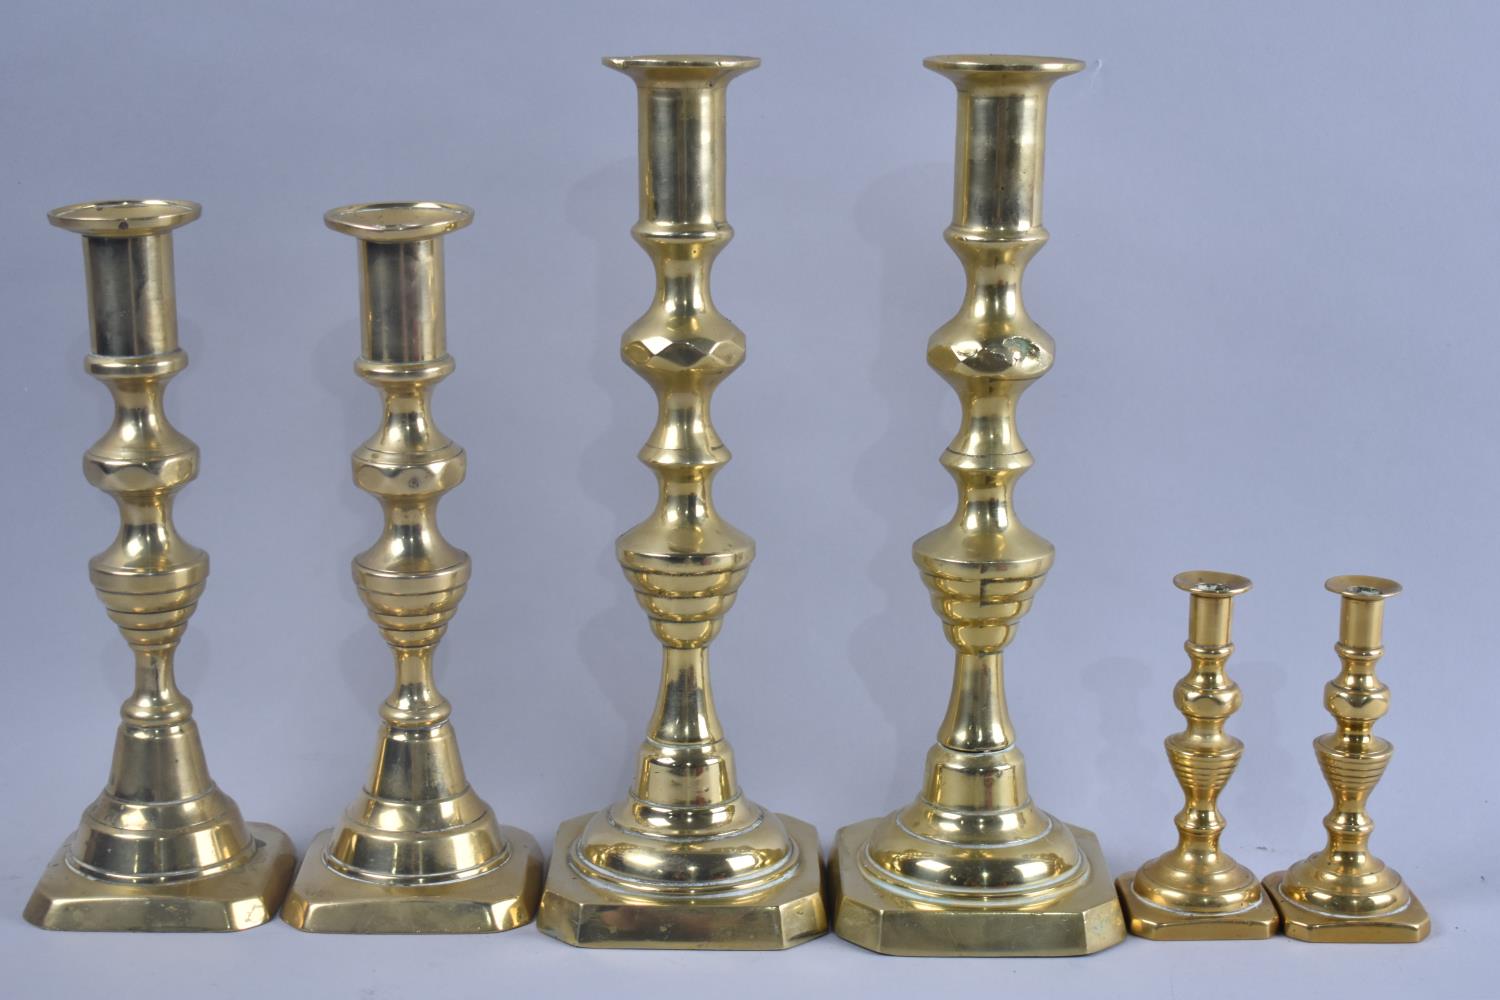 Three Pairs of Polished Brass Candlesticks, Tallest 25cms High